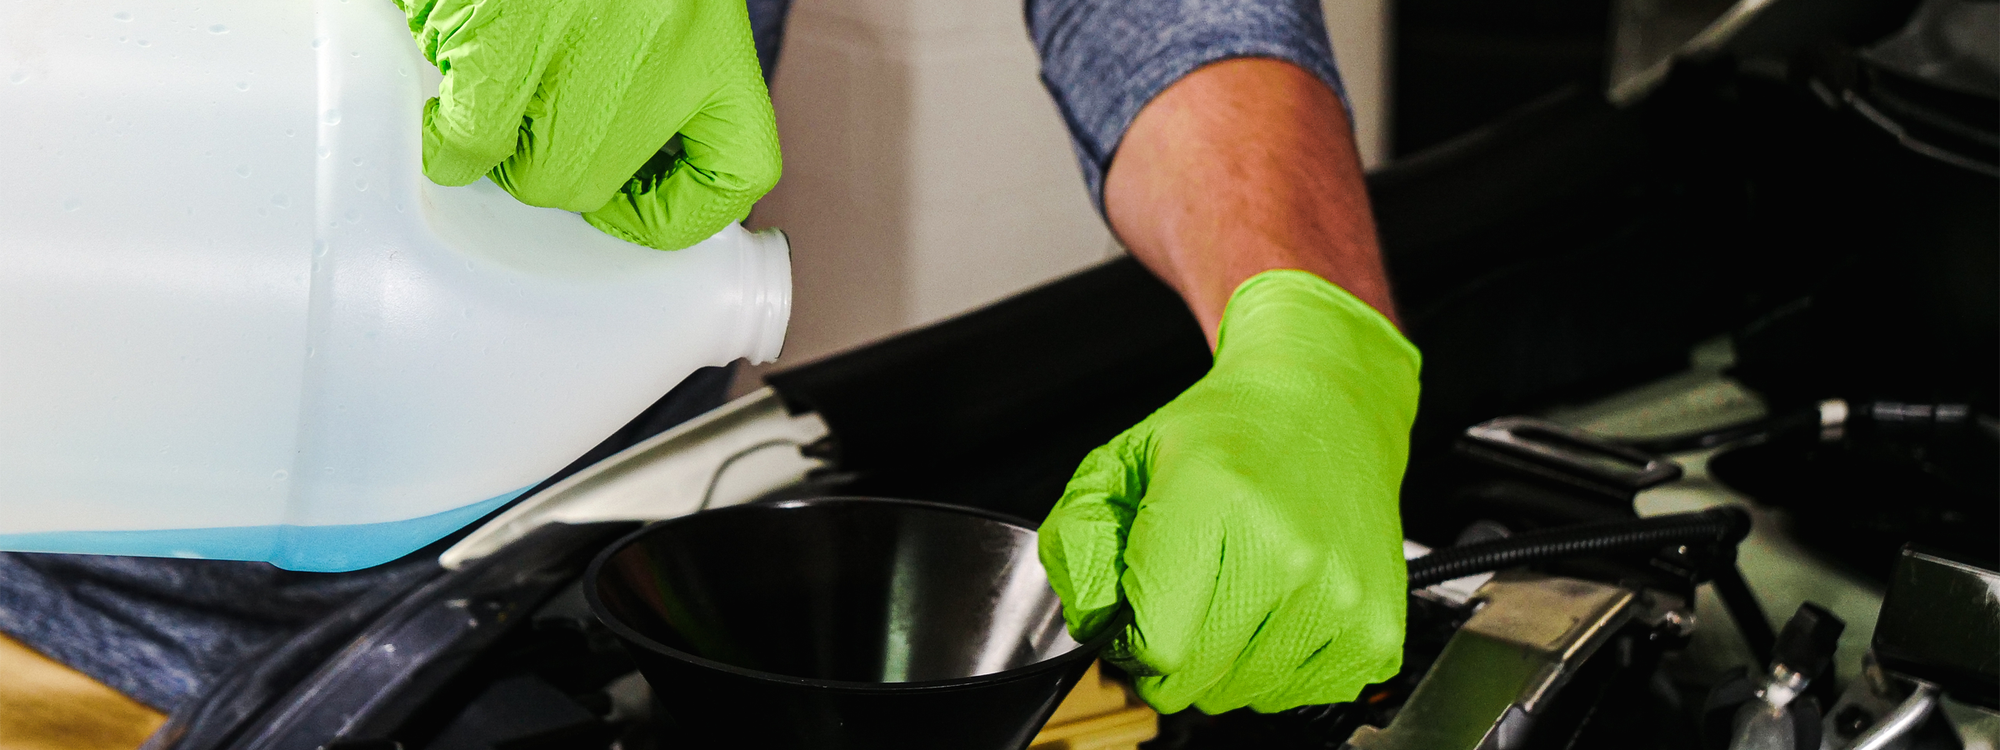 A pair of hands wearing python grip nitrile gloves pouring blue liquid into a funnel.